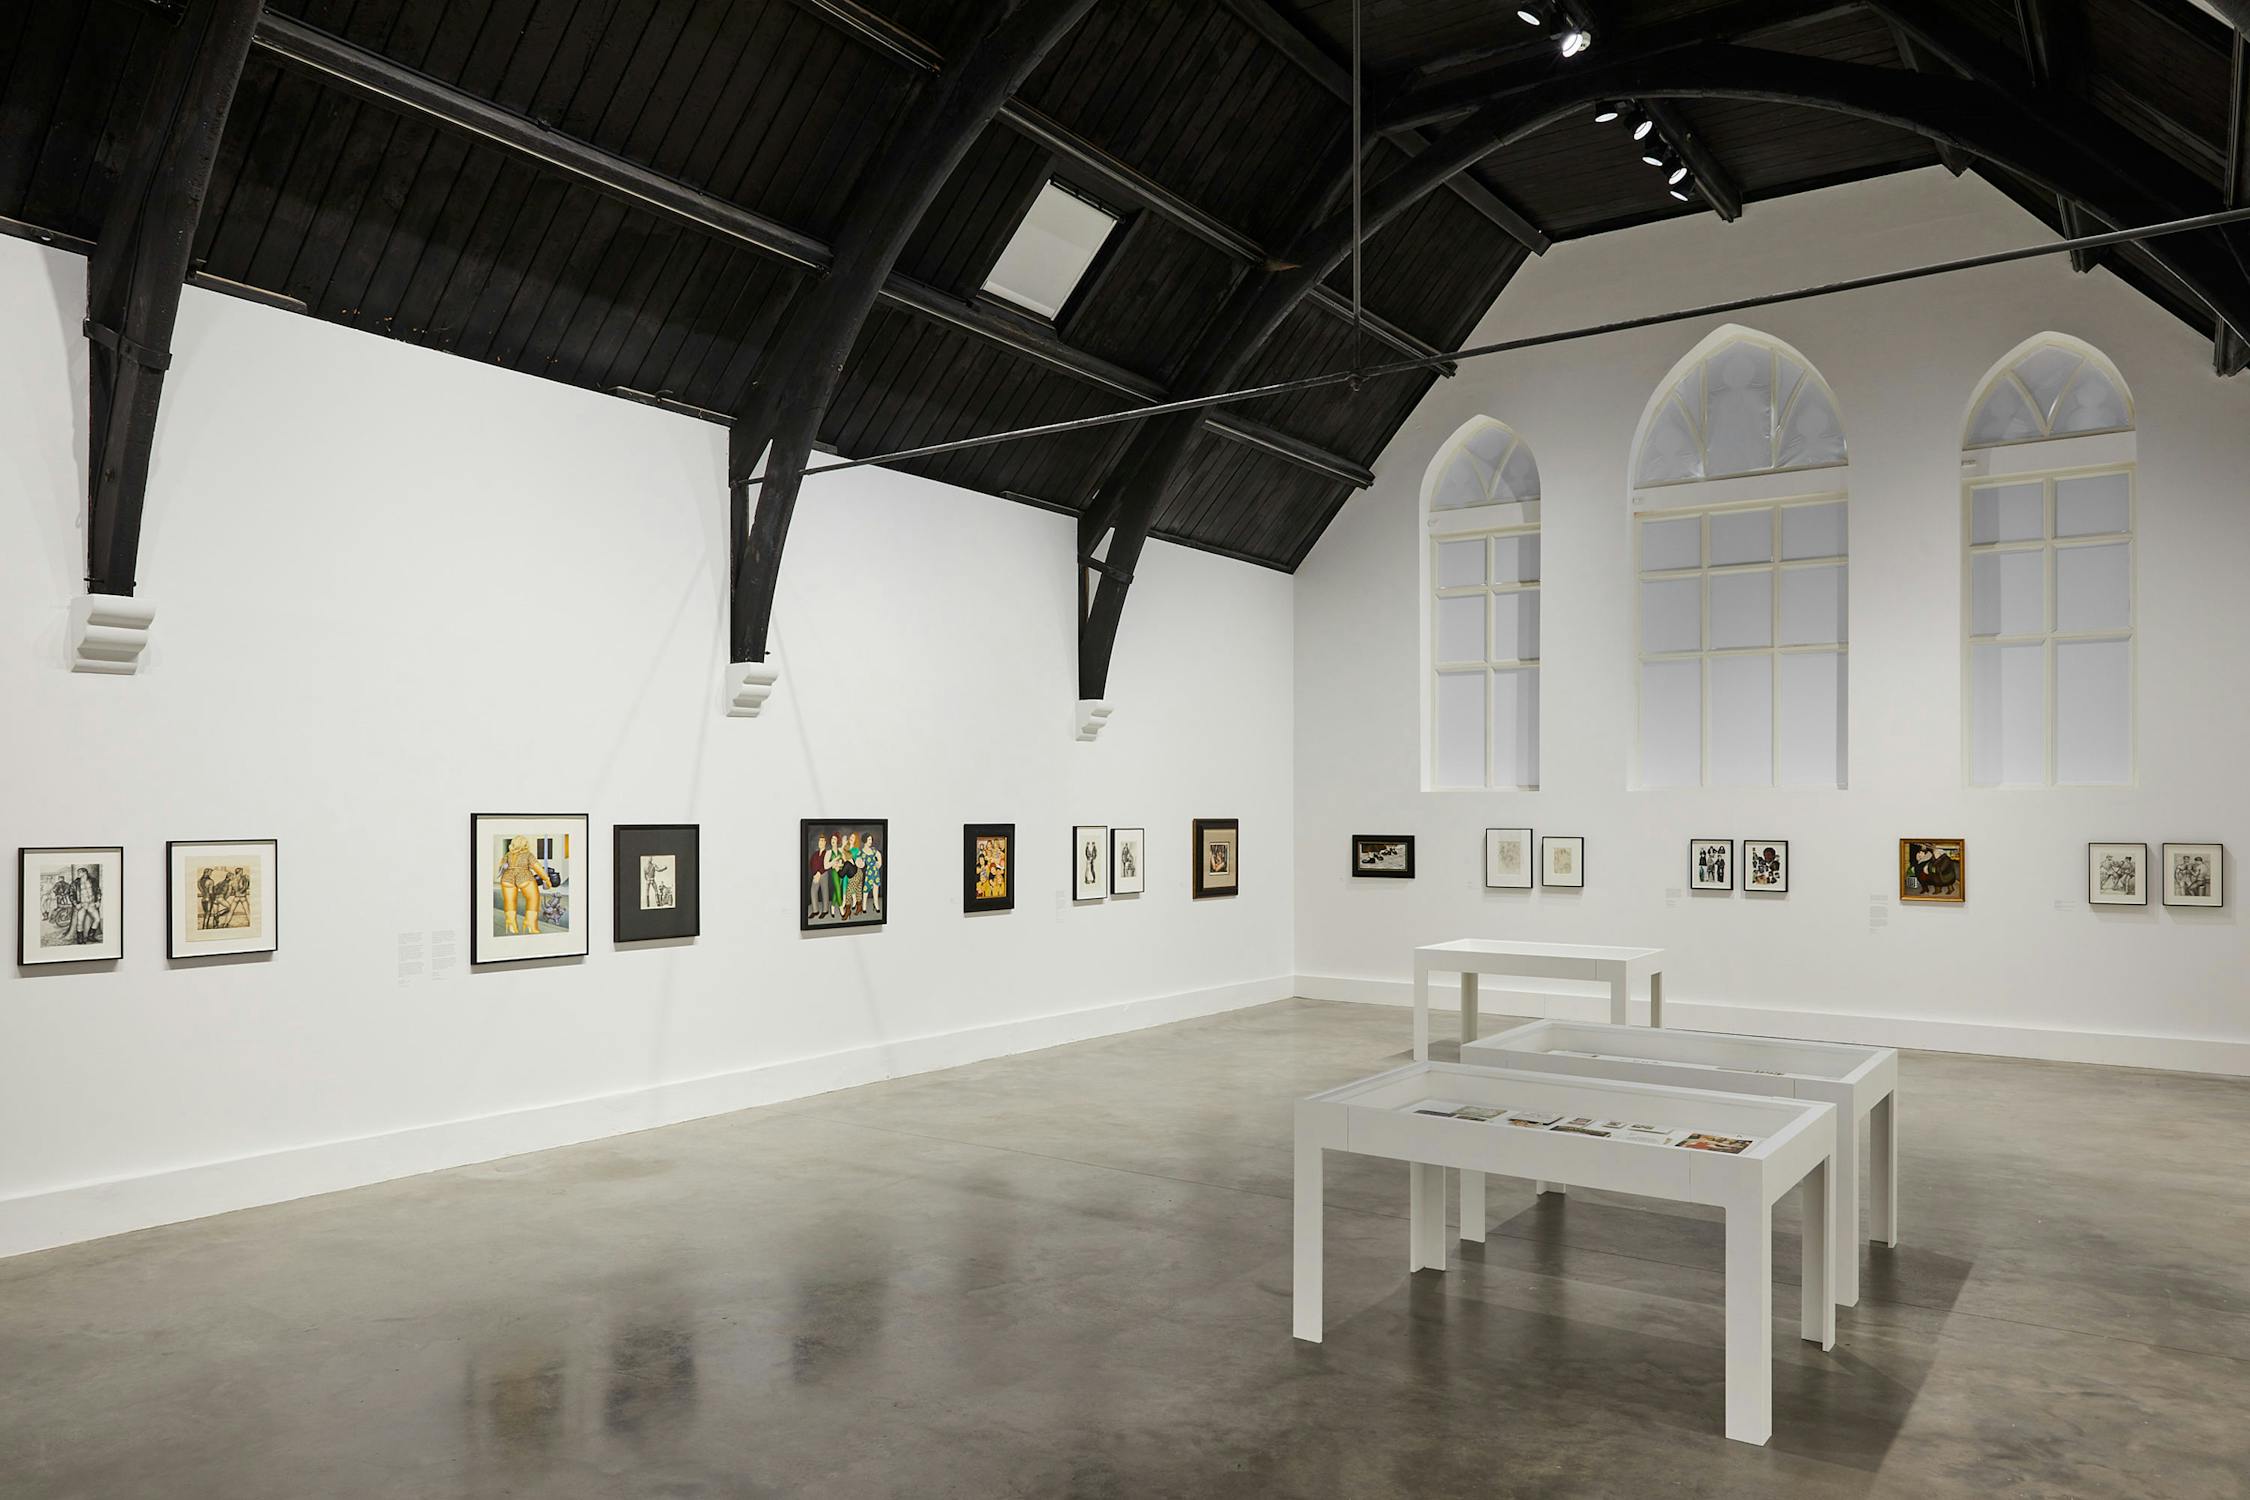 a gallery with white walls, dark vaulted ceiling and polished concrete floors. Artworks by Beryl Cook and Tom of Finland line the walls, and three vitrines are positioned within the space.